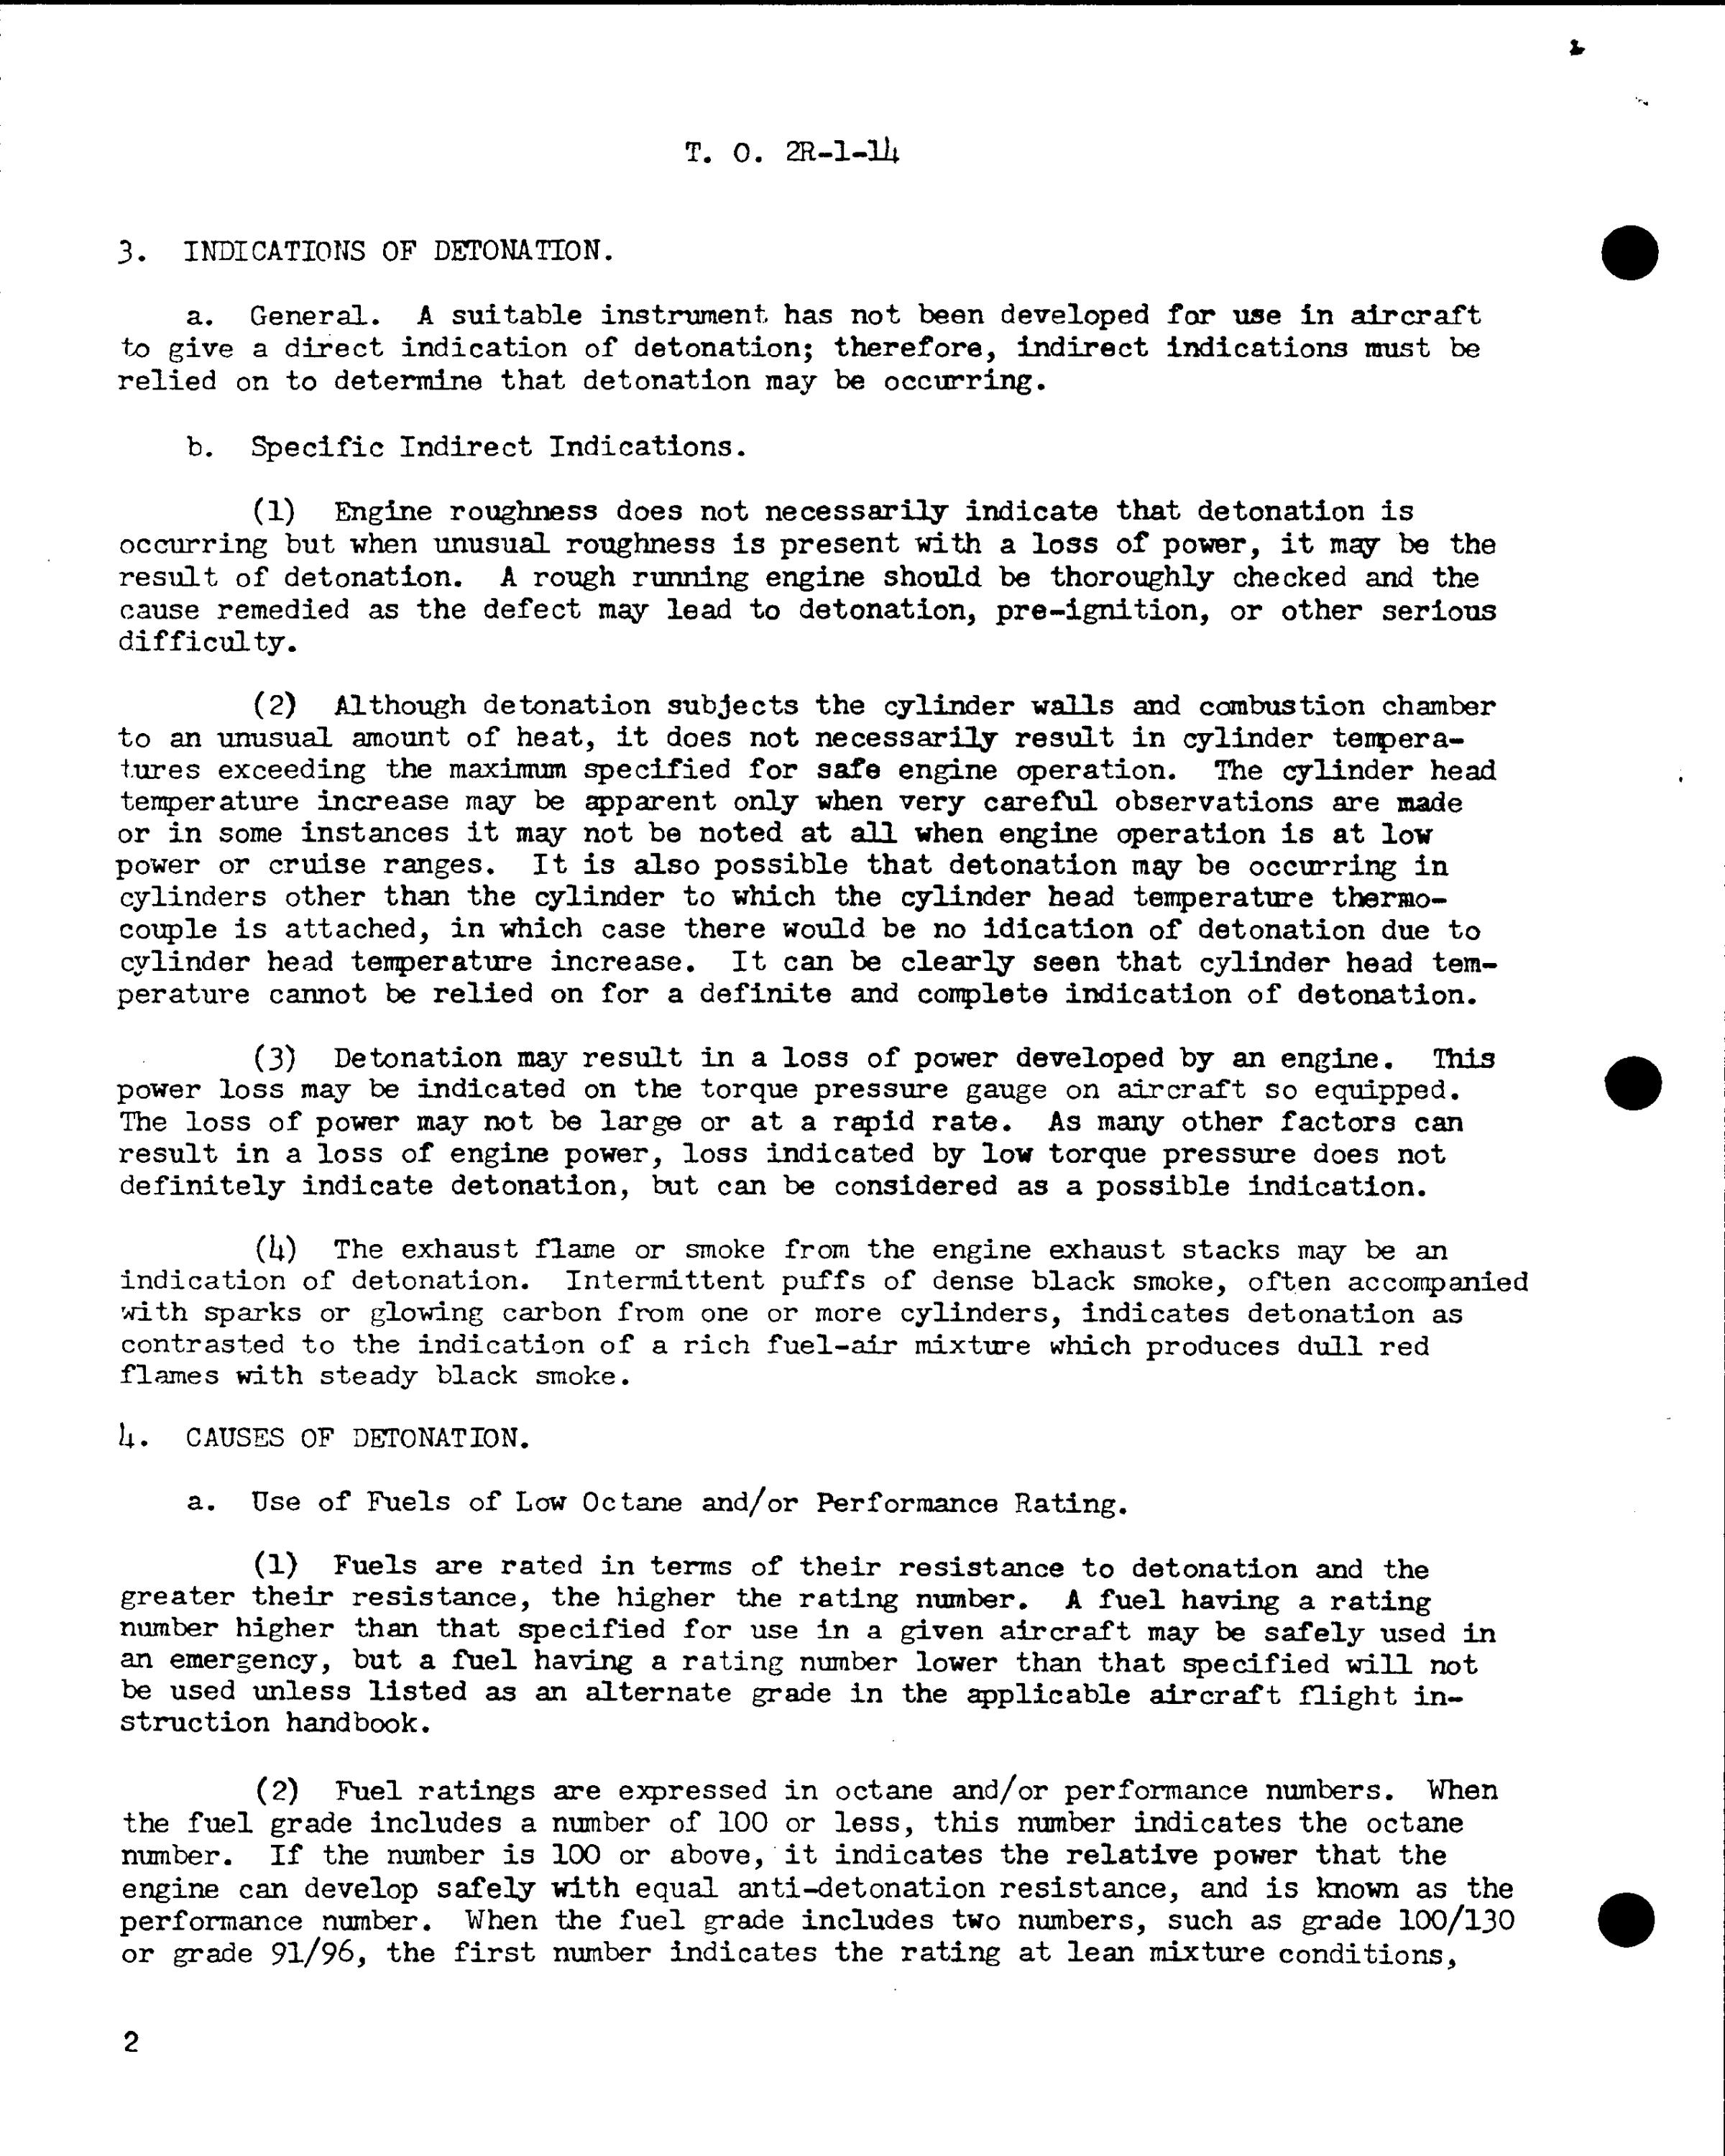 Sample page 2 from AirCorps Library document: Detonation in Aircraft Engines